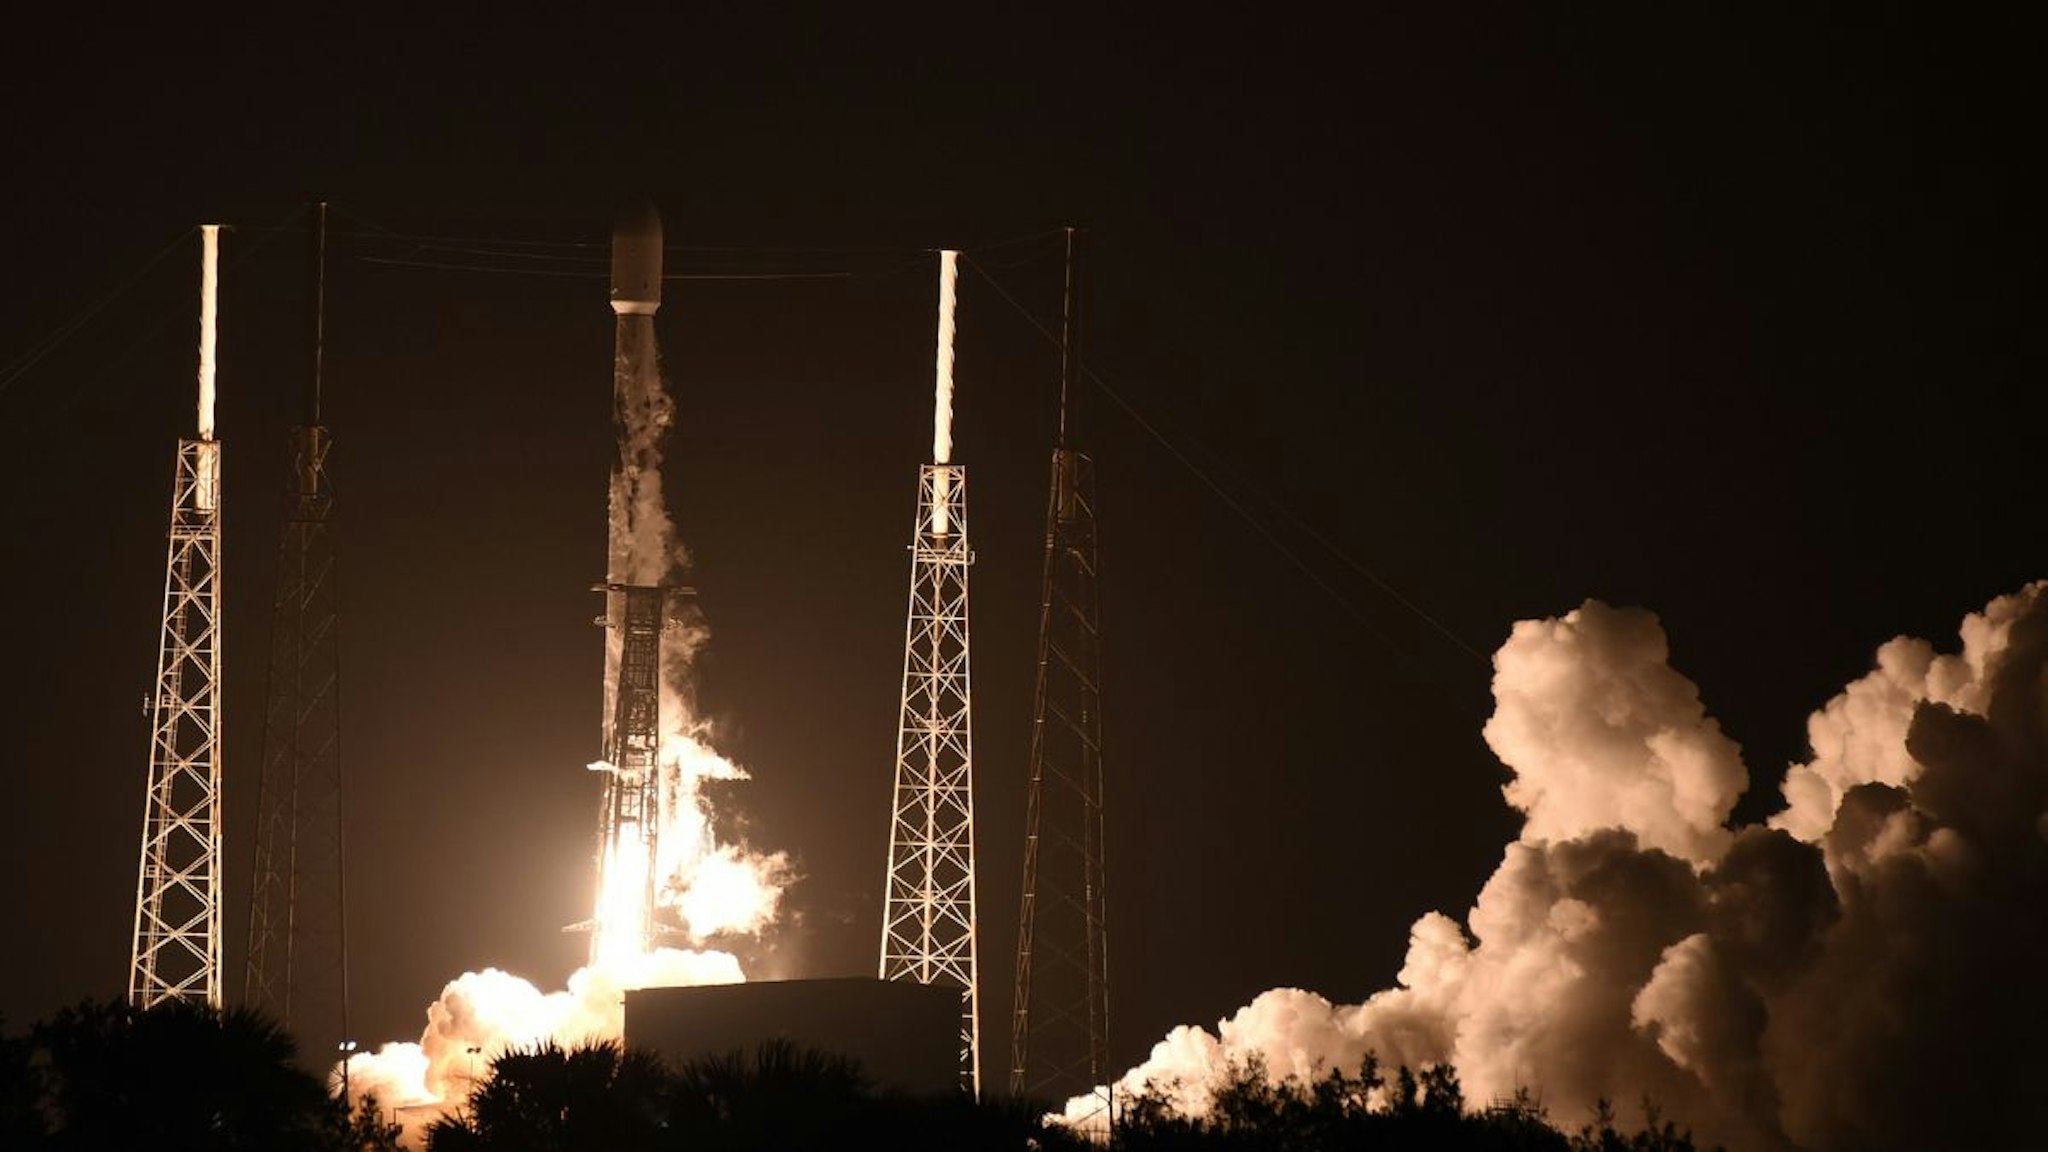 A SpaceX Falcon 9 rocket launches the HAKUTO-R Mission 1 from pad 40 at Cape Canaveral Space Force Station on December 11, 2022 in Cape Canaveral, Florida.